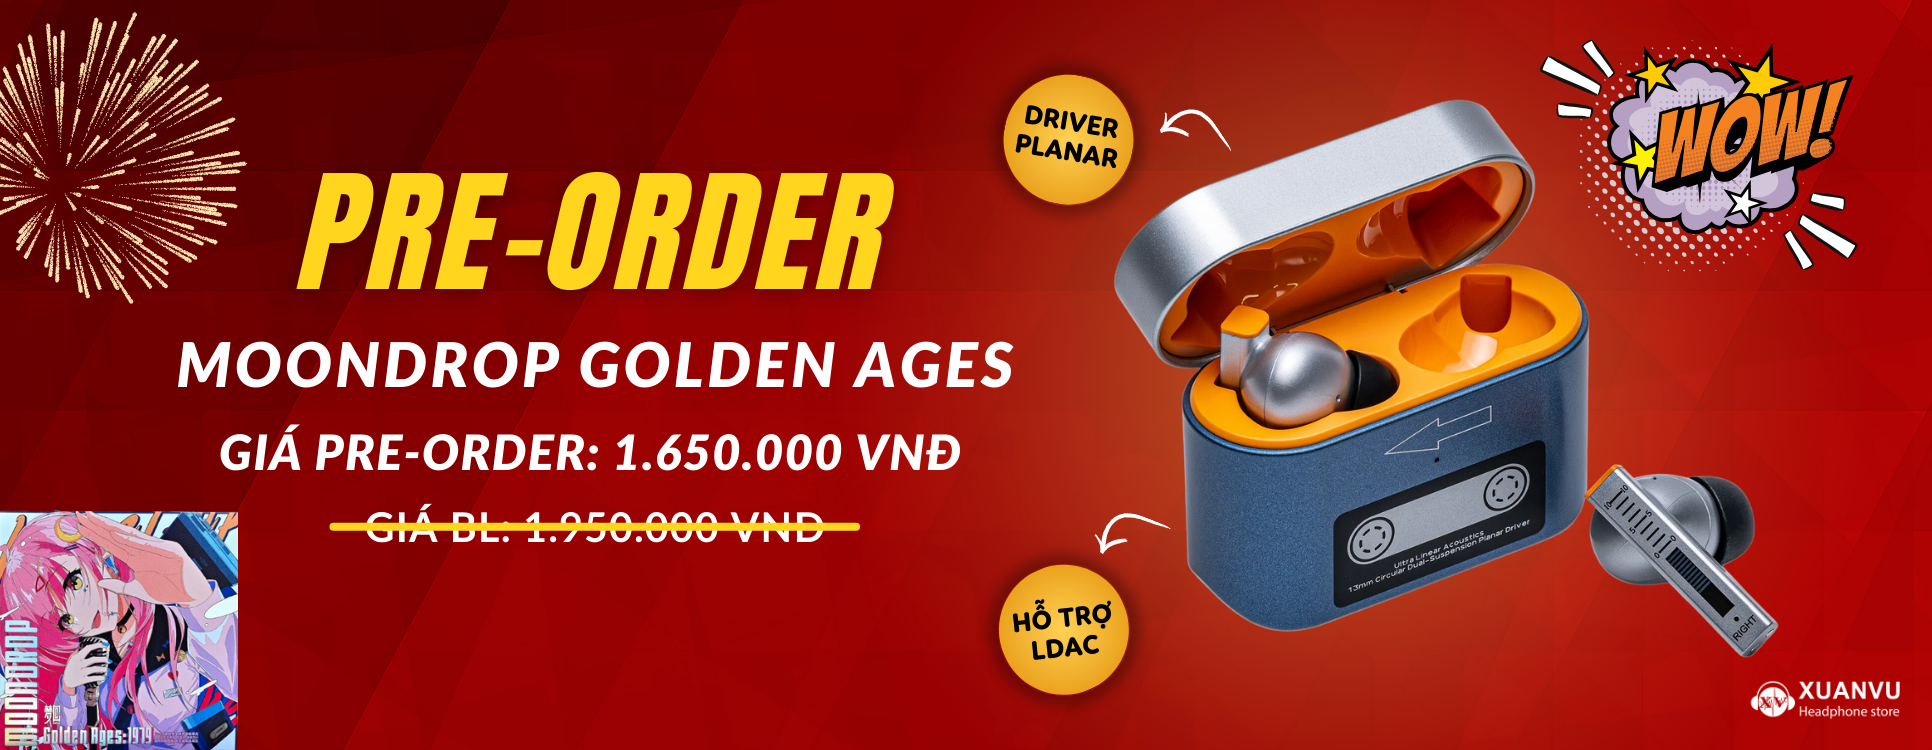 Pre-order tai nghe Moondrop Golden Ages